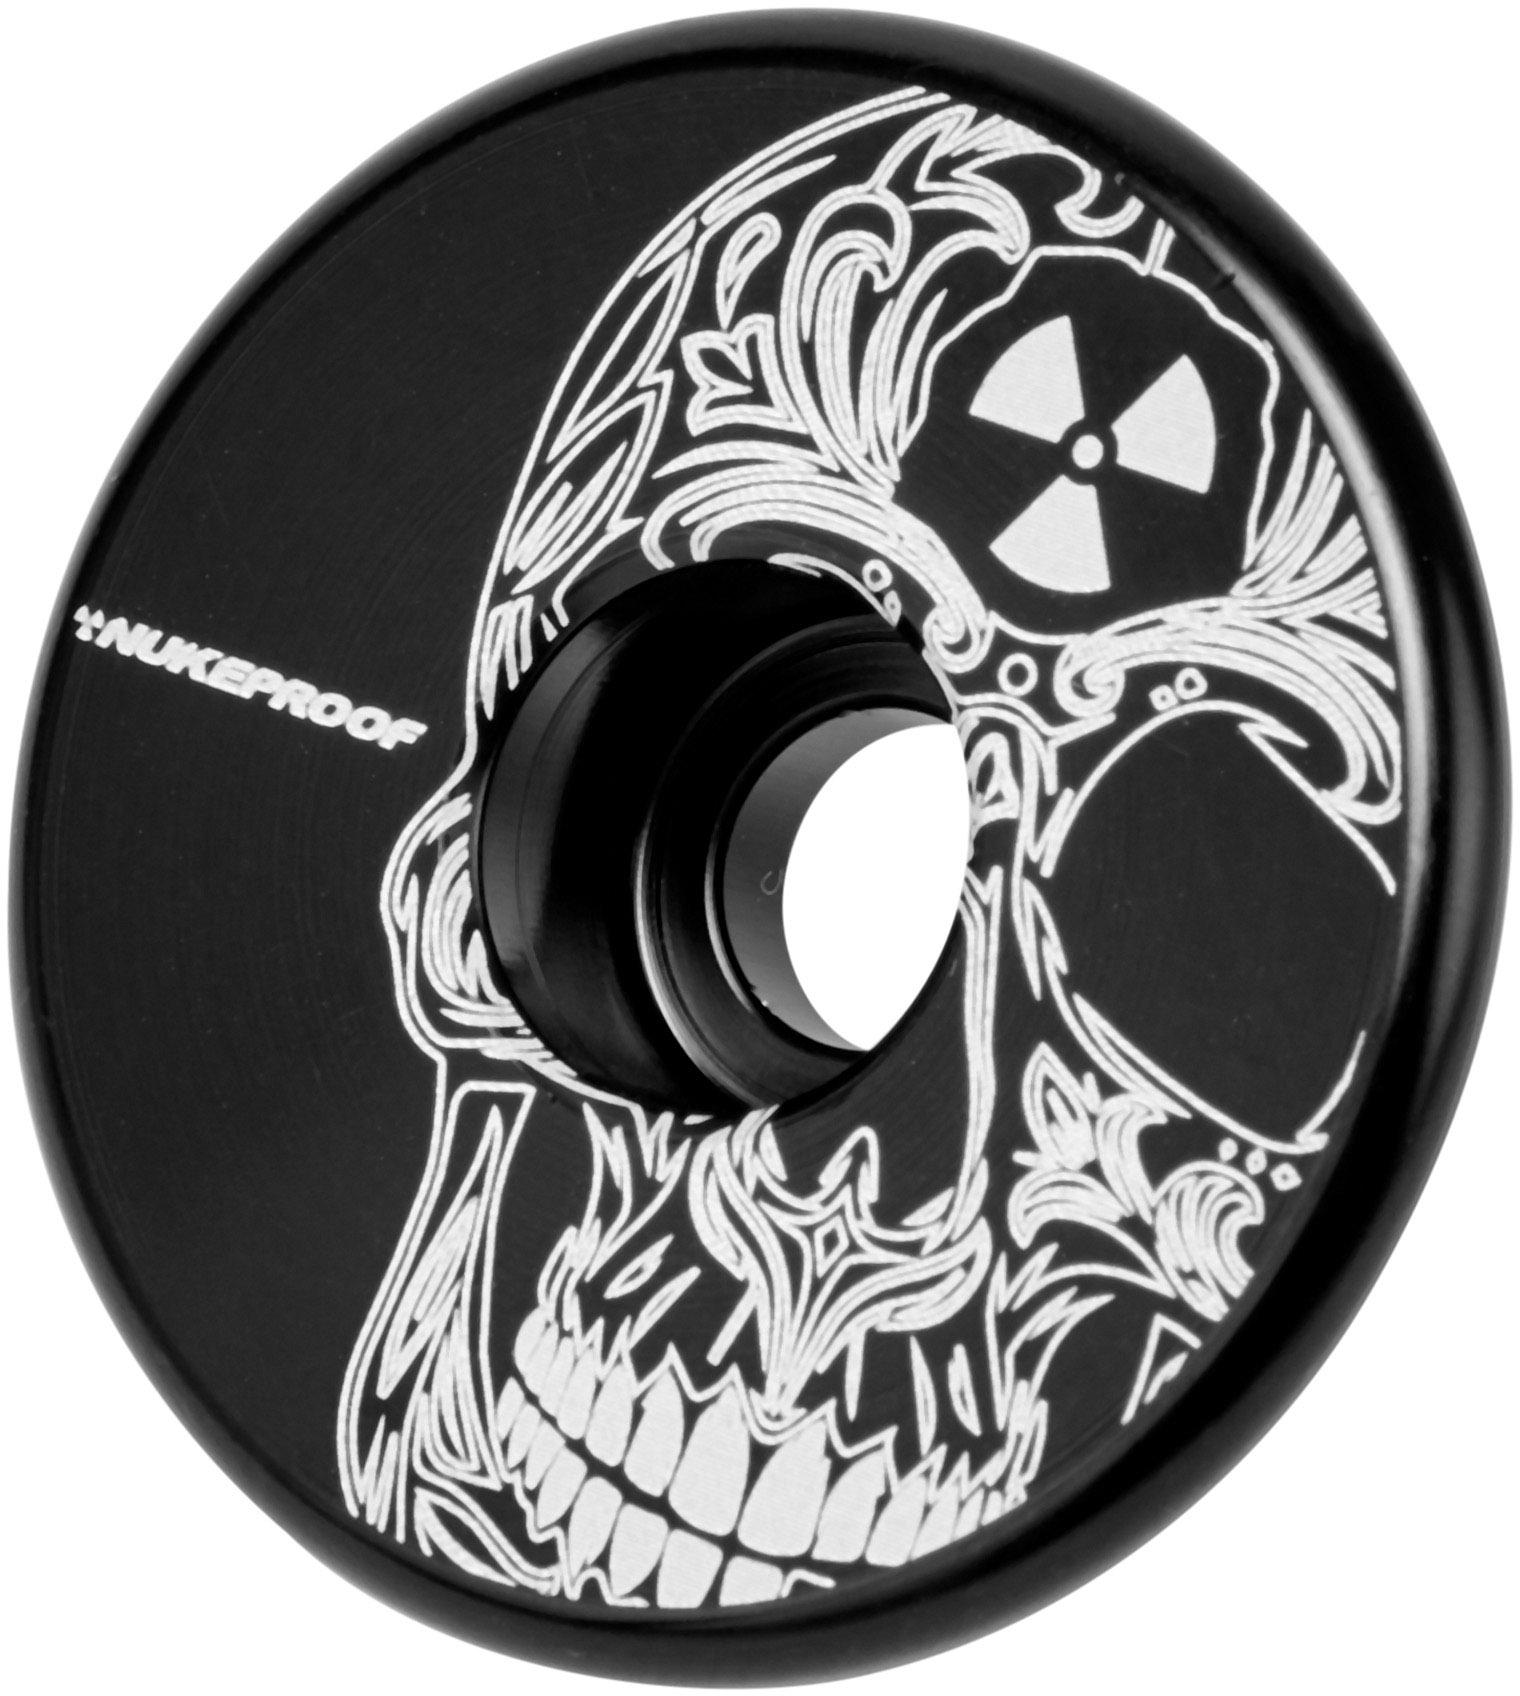 Nukeproof Headset Top Cap And Star Nut  Skull